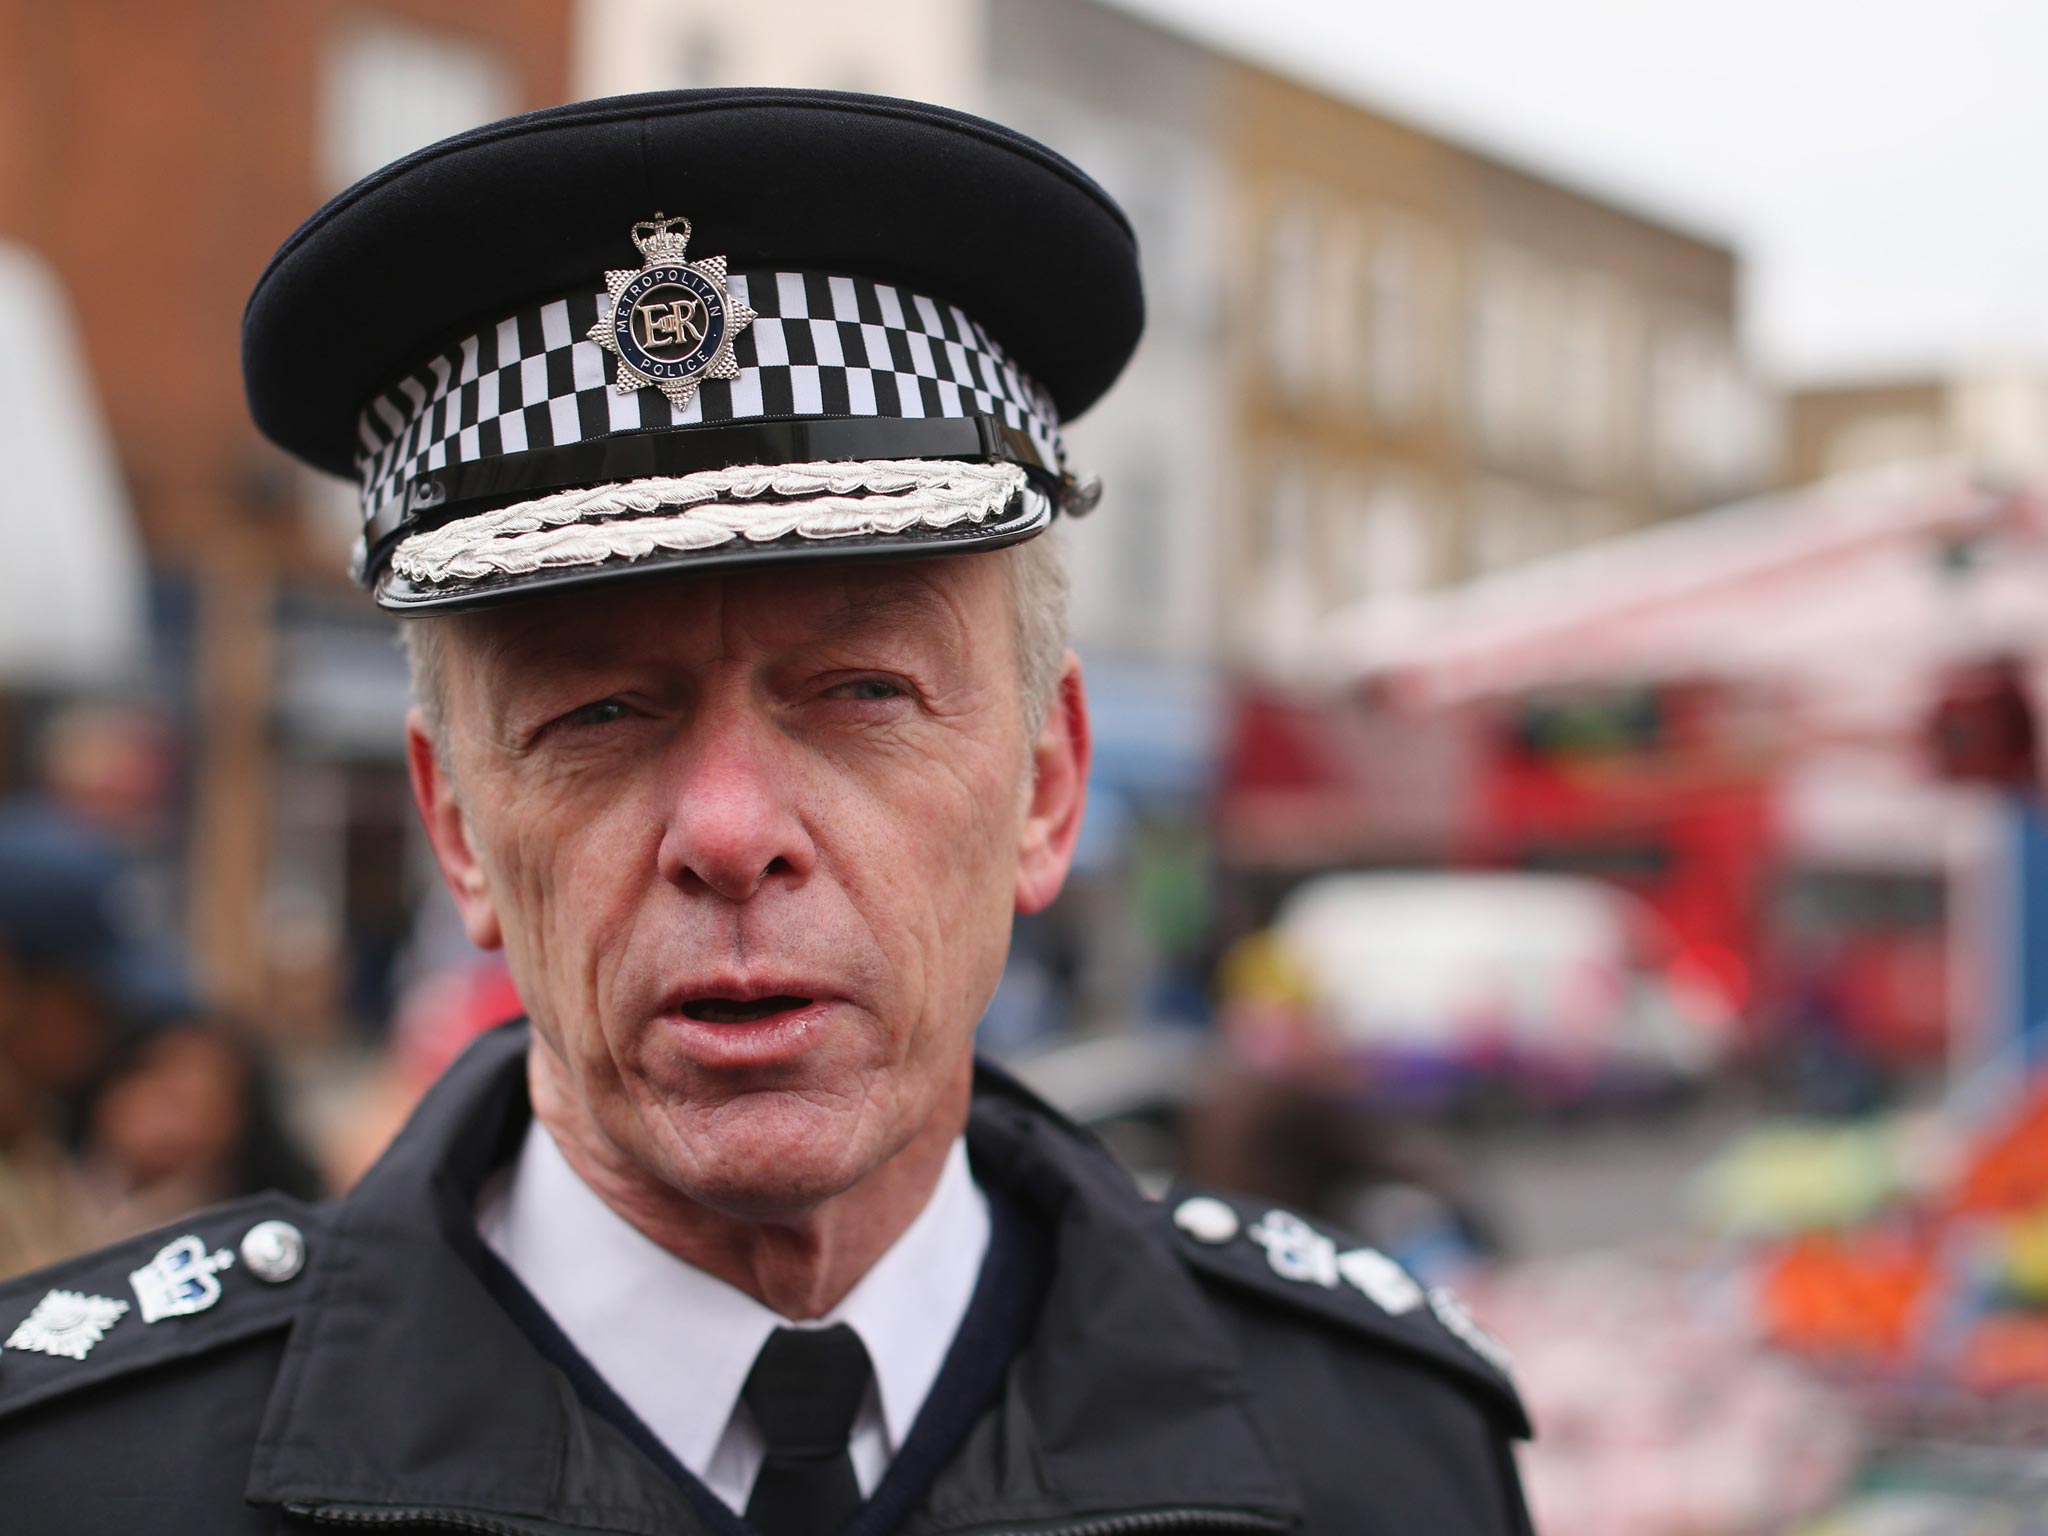 Metropolitan Police Commissioner Sir Bernard Hogan-Howe revealed that Operation Othona had a projected budget of £7.82m over a three-year period